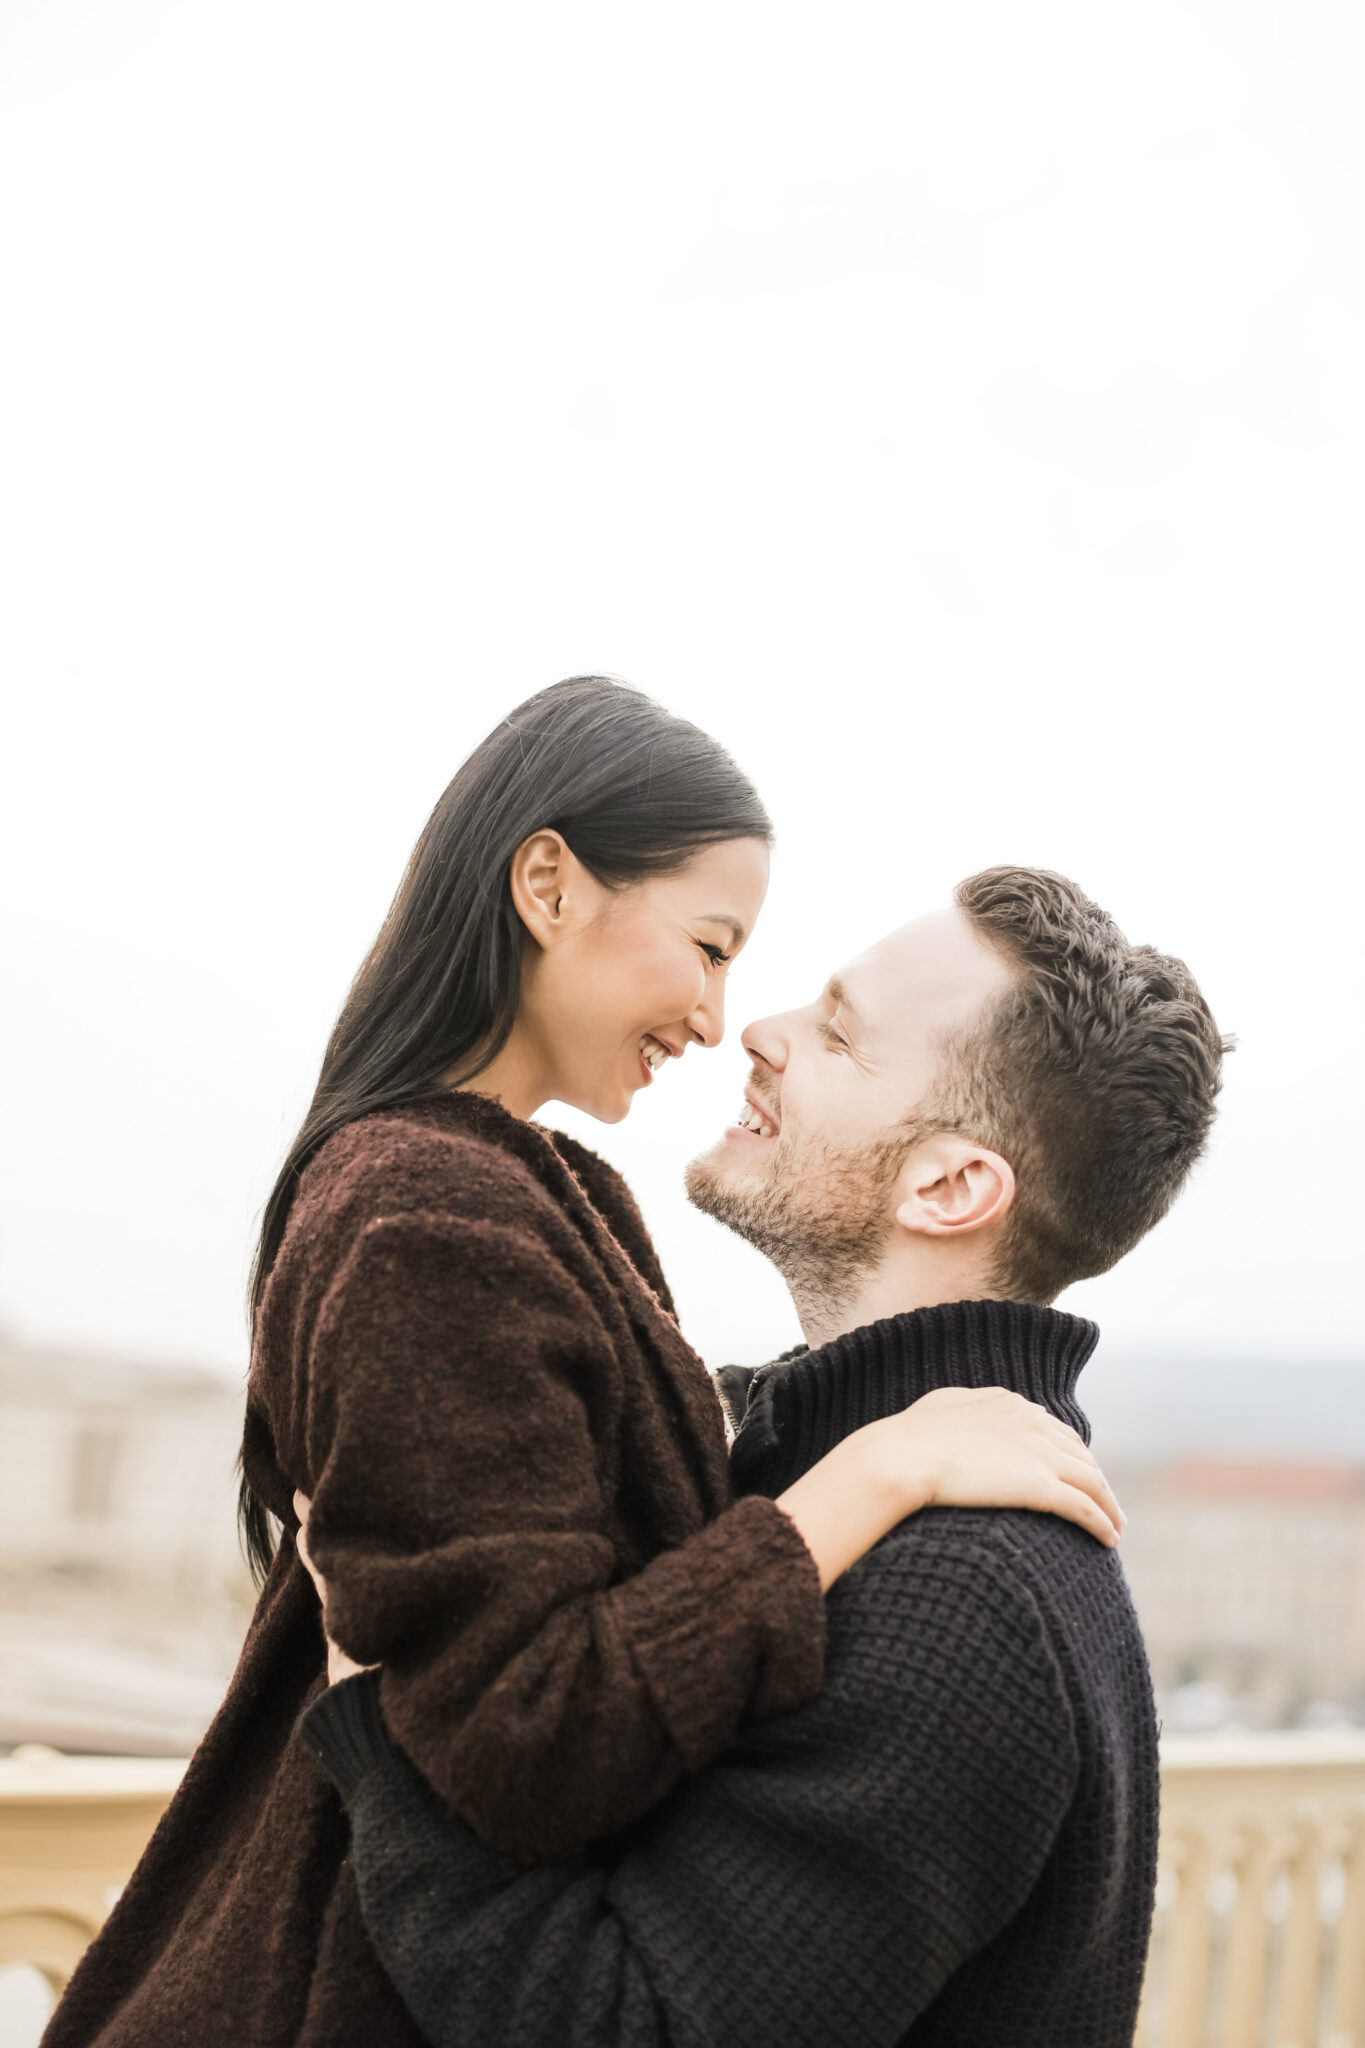 A man holds a woman up in his arms and they look at each other lovingly. This article covers tips for building a healthy romantic relationship.